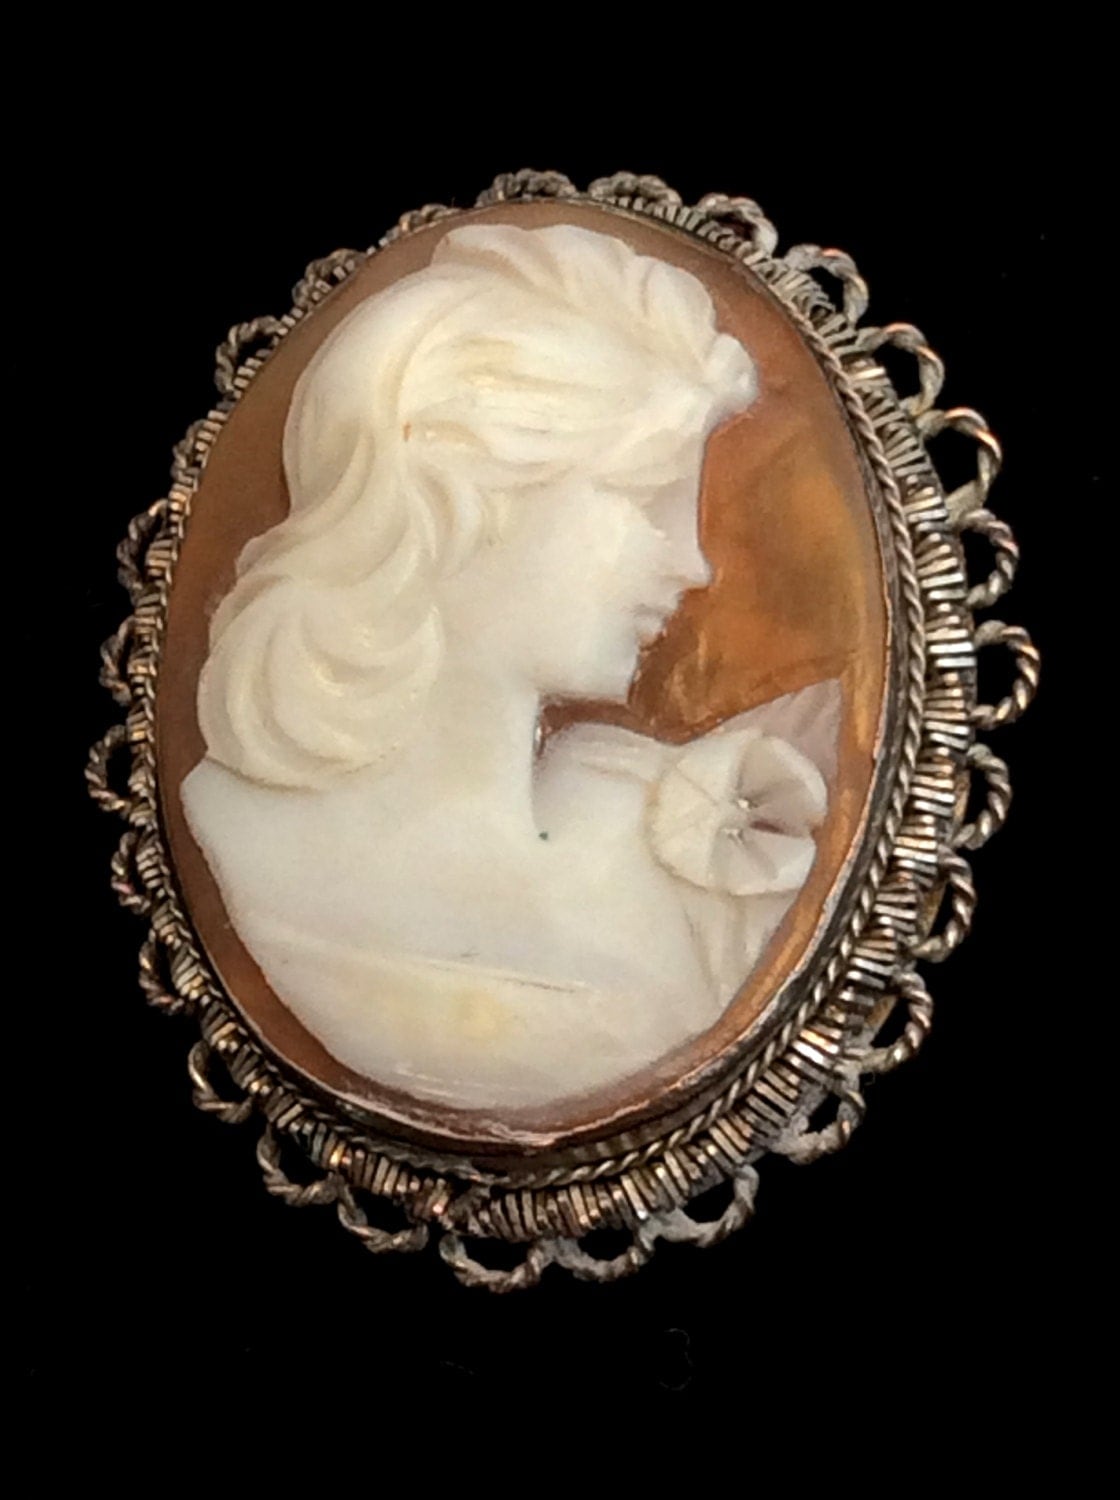 Antique Cameo Brooch Pin or Pendant. Fine Sterling Silver Wire